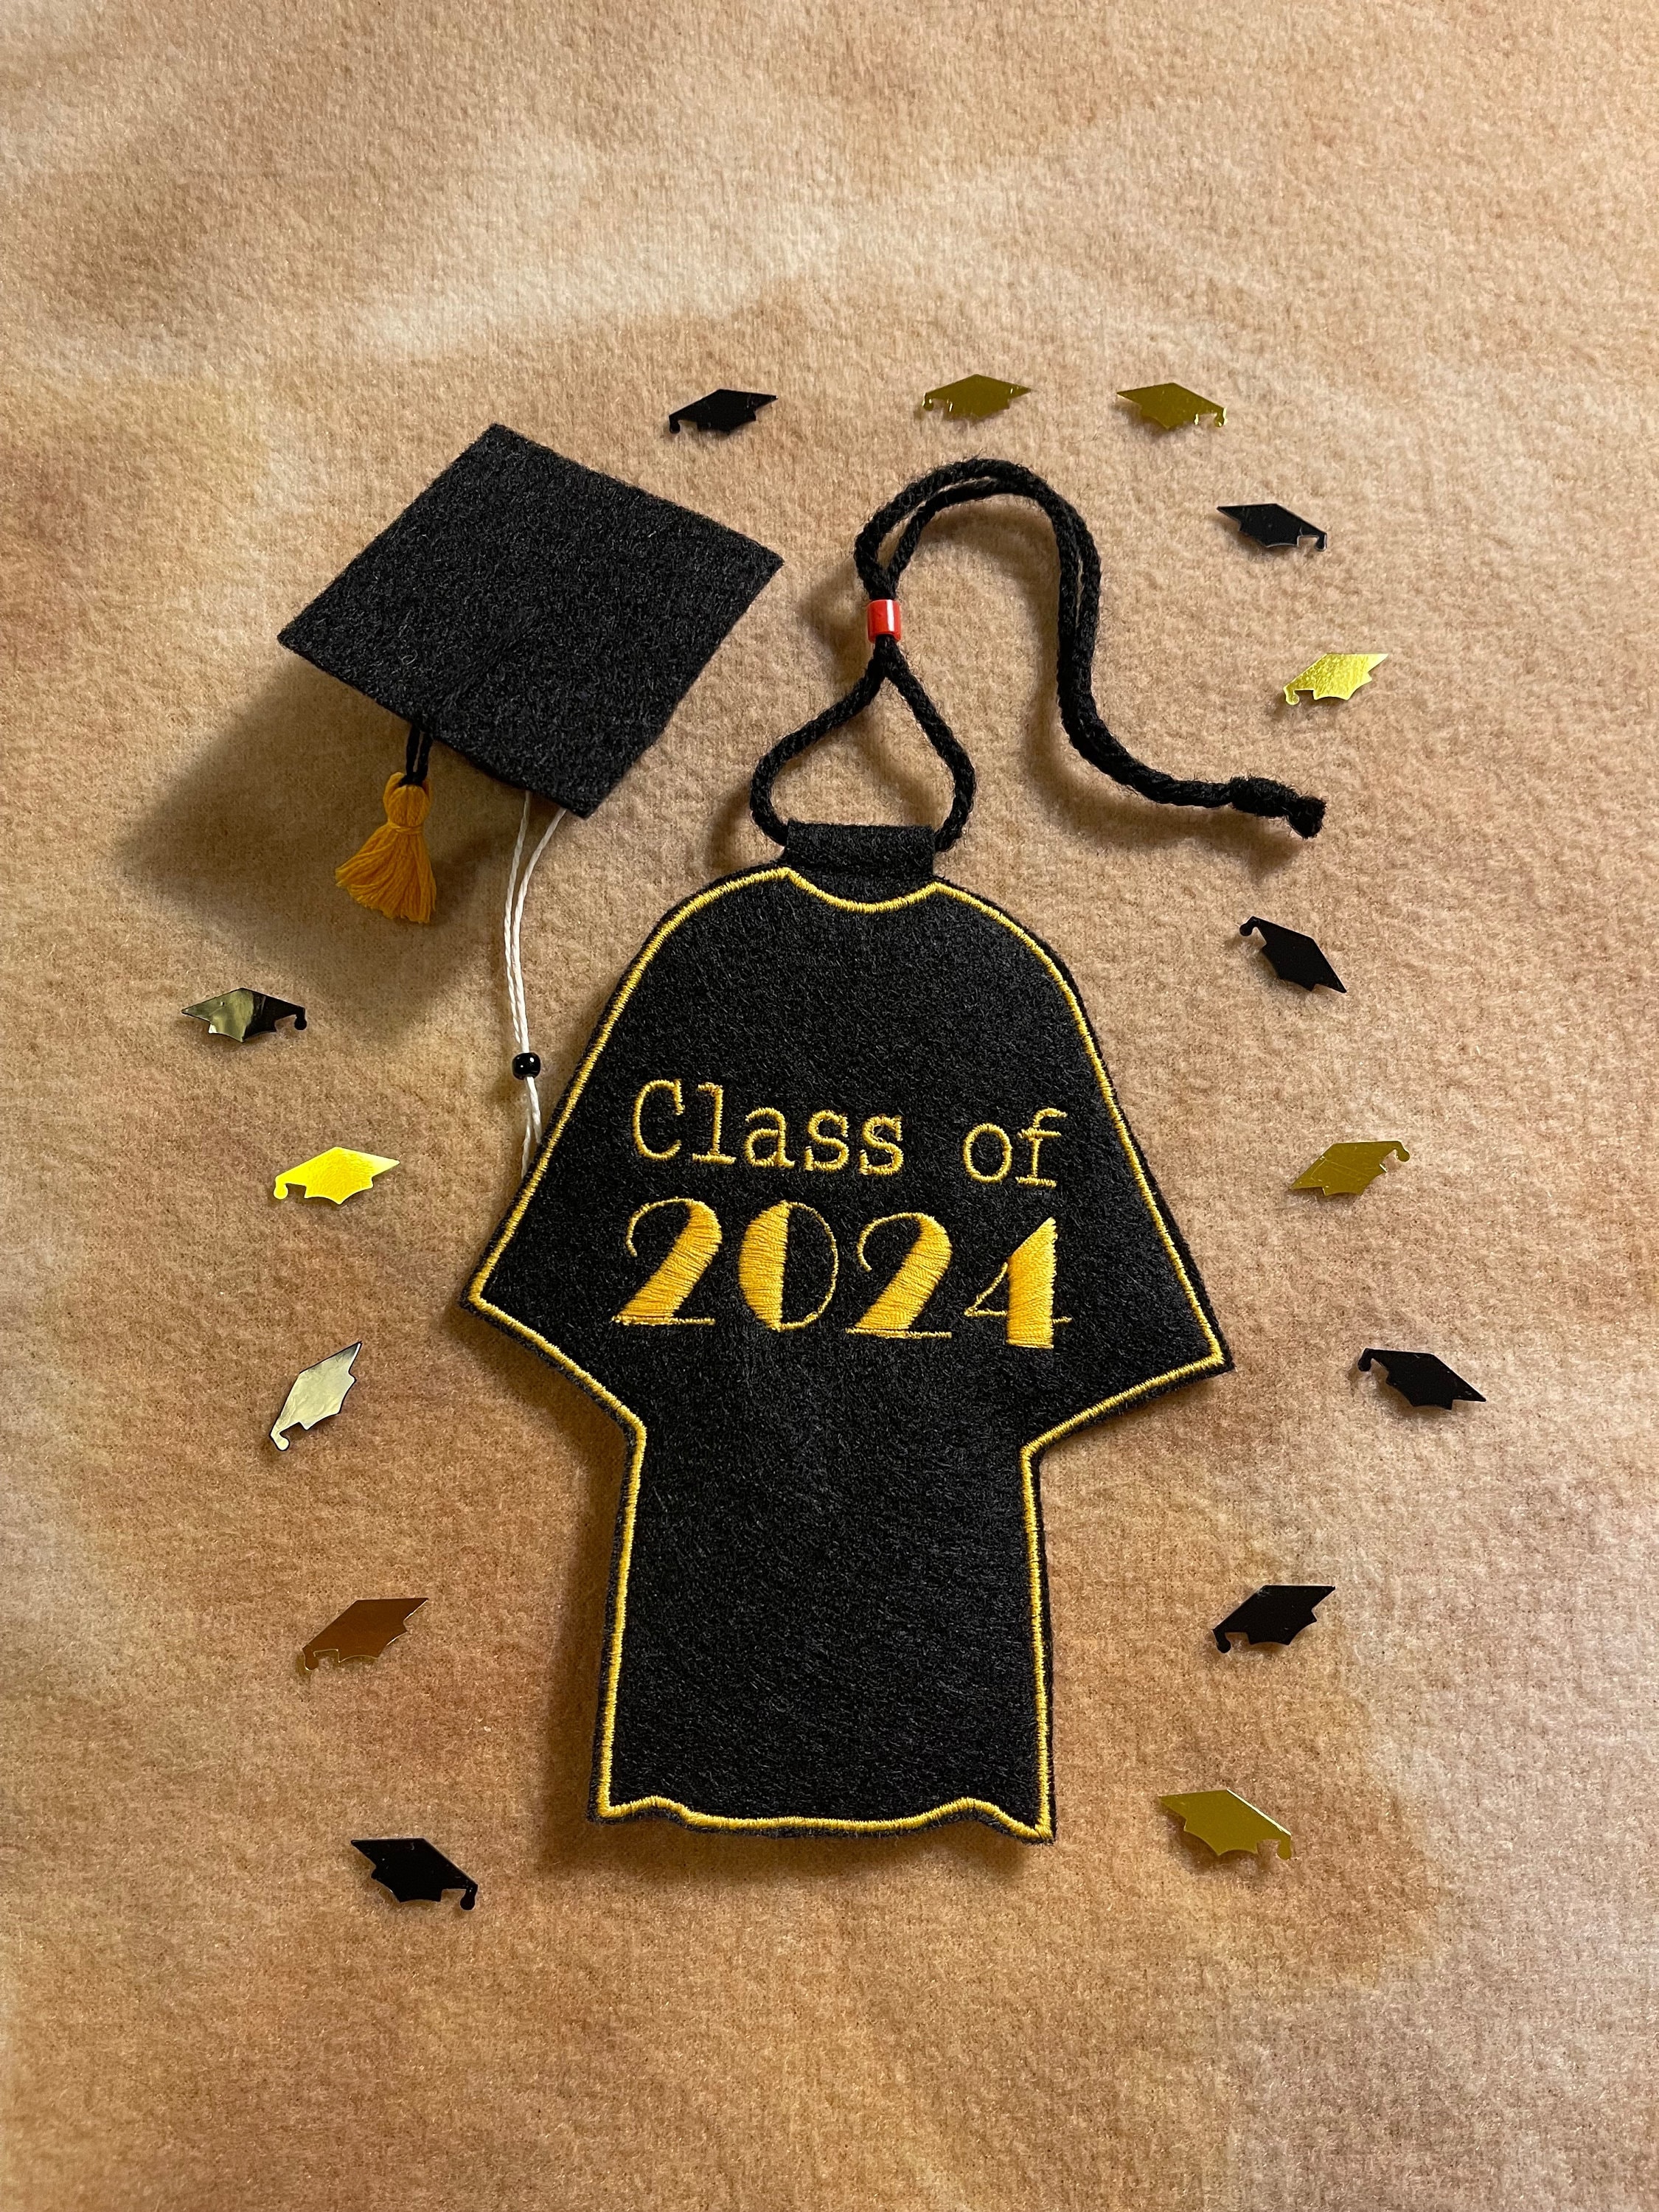 Graduation 2024 for Letterboards, Cap and Gown, Graduation Party